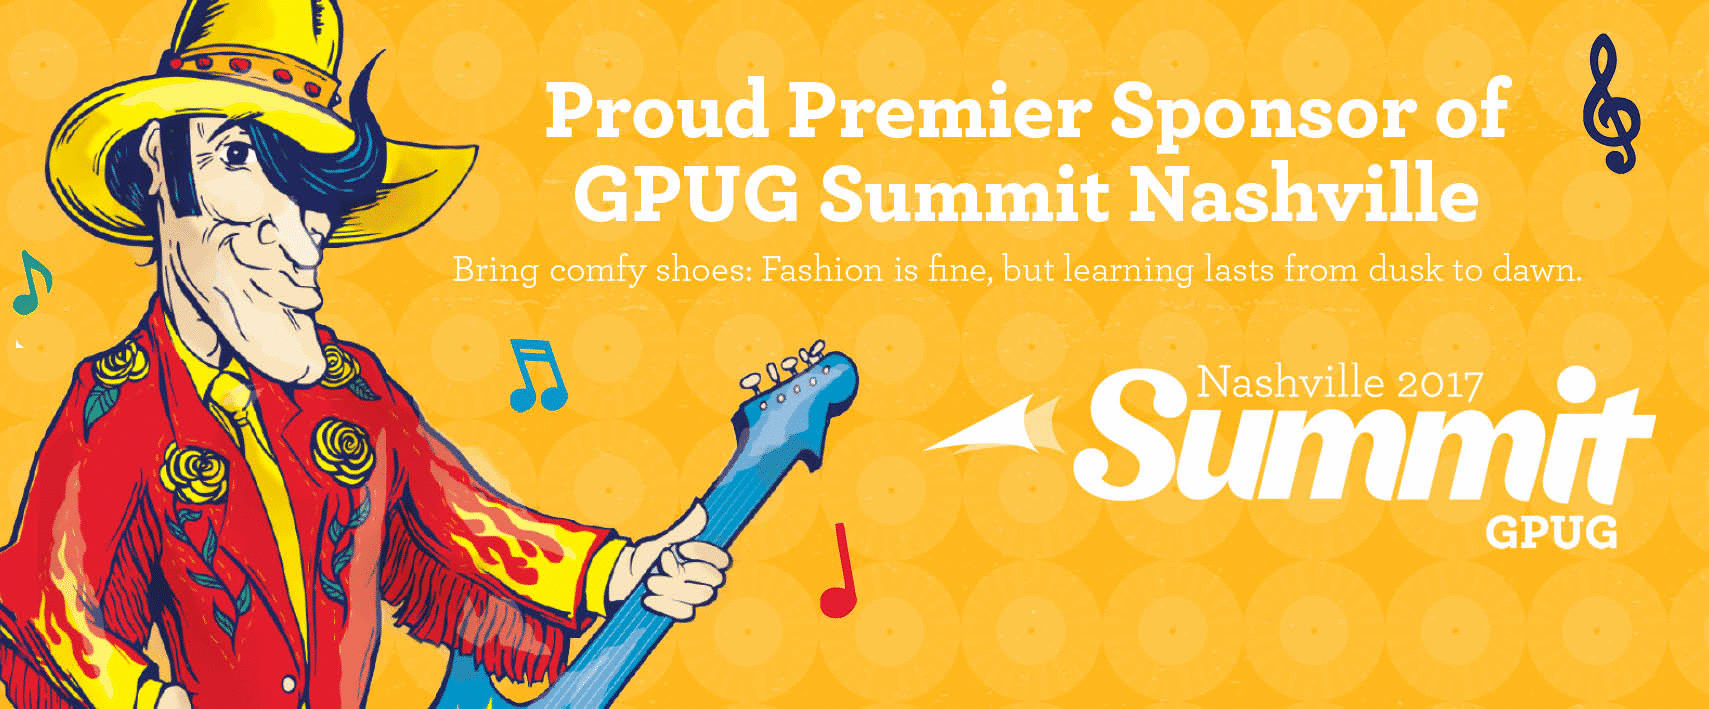 Altec is a Proud Premier/Gold Sponsor of AXUG, GPUG and NAVUG Summits in Nashville! 